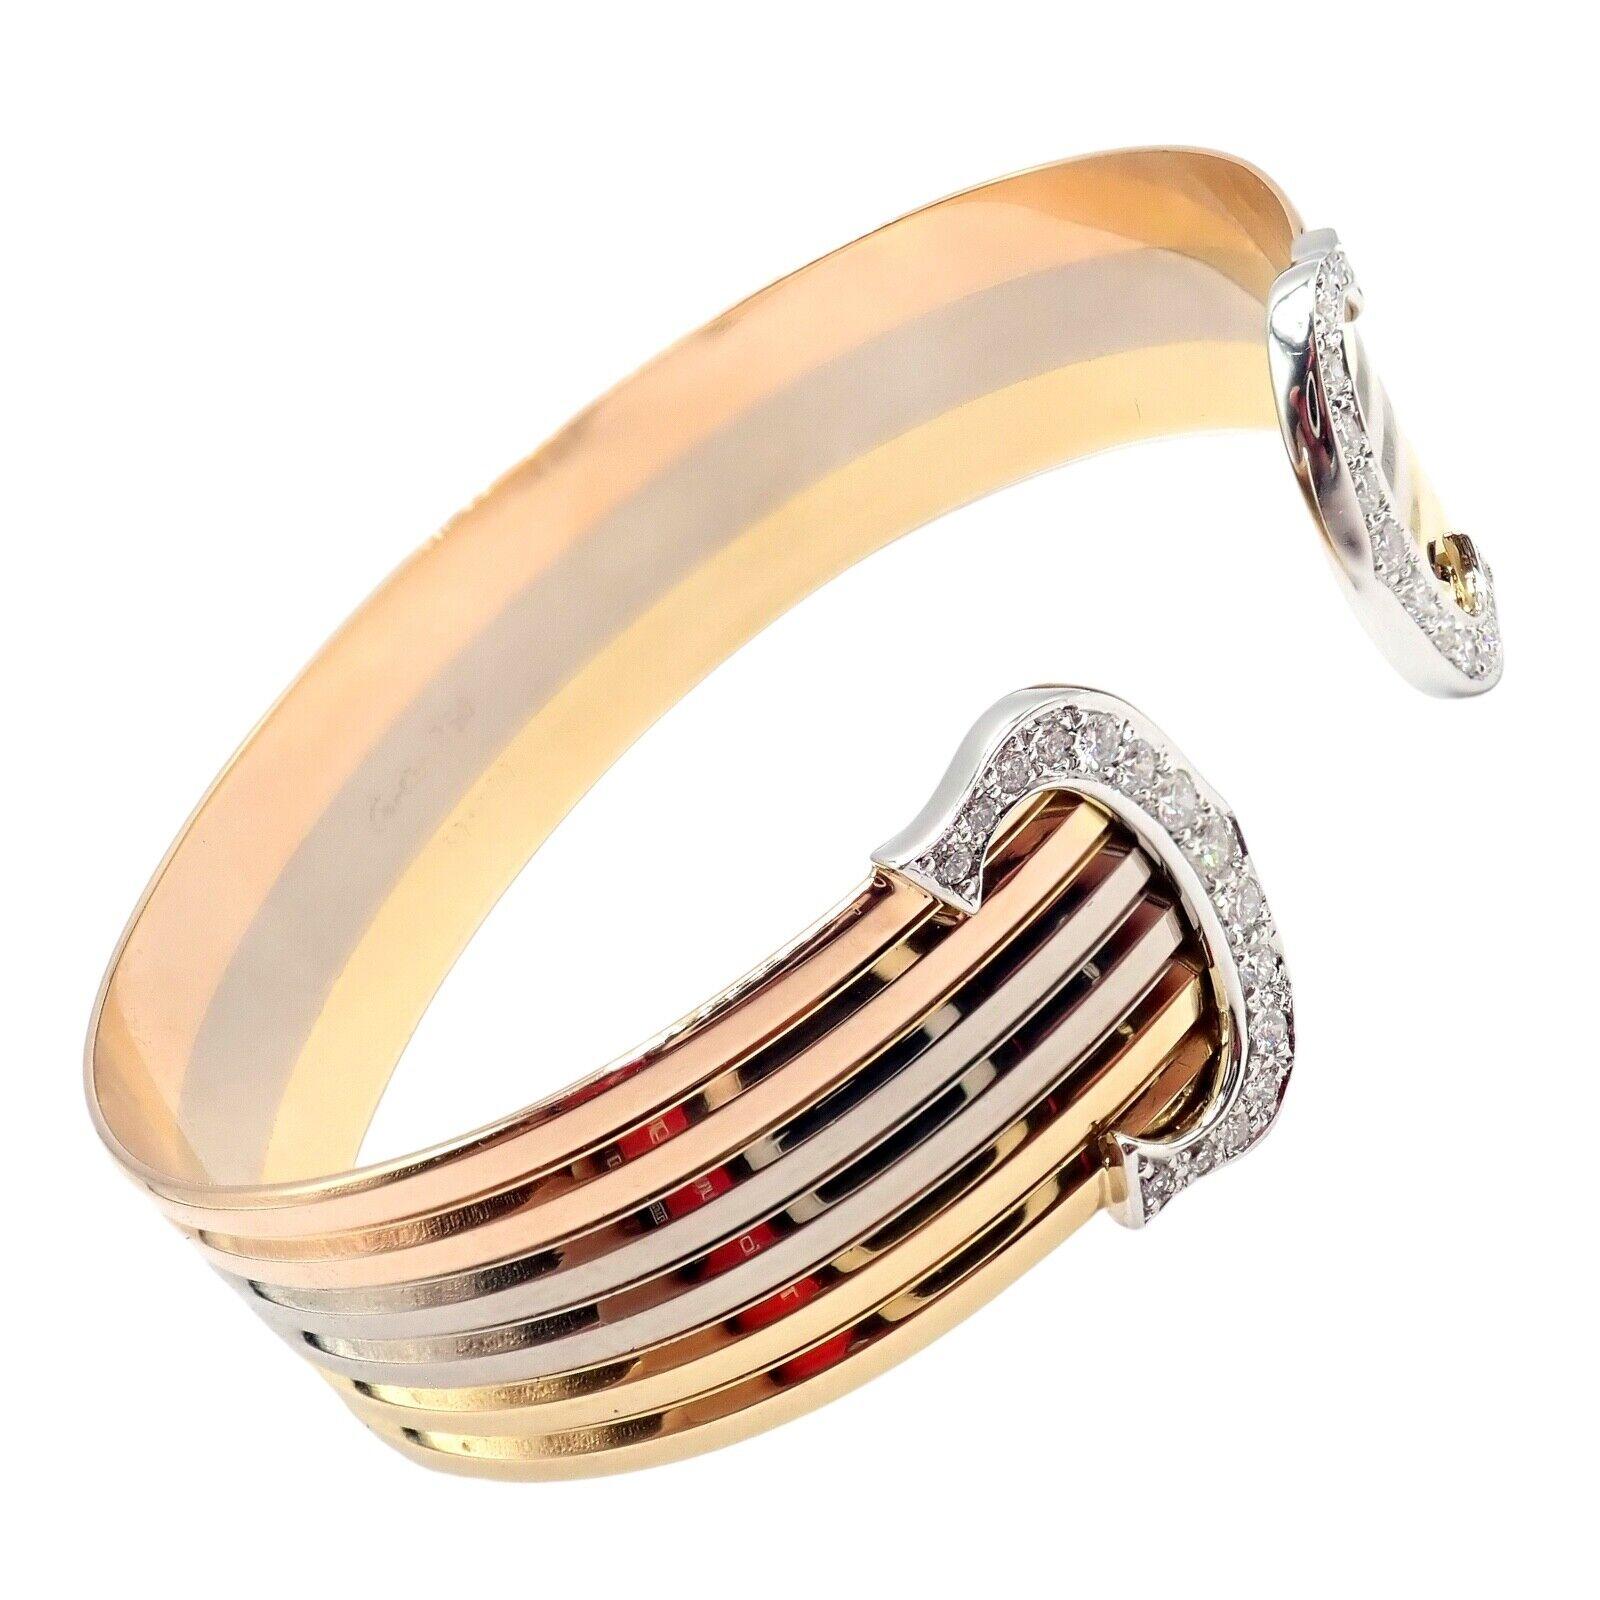 18k Tri-Color Gold (Yellow, White, Rose) Diamond Double-C Bangle Cuff Bracelet by Cartier. 
With 30 round brilliant cut diamonds total weight approx .90ct. Diamonds VS1 clarity, E color
Details: 
Weight: 30.1 grams
Length: 7